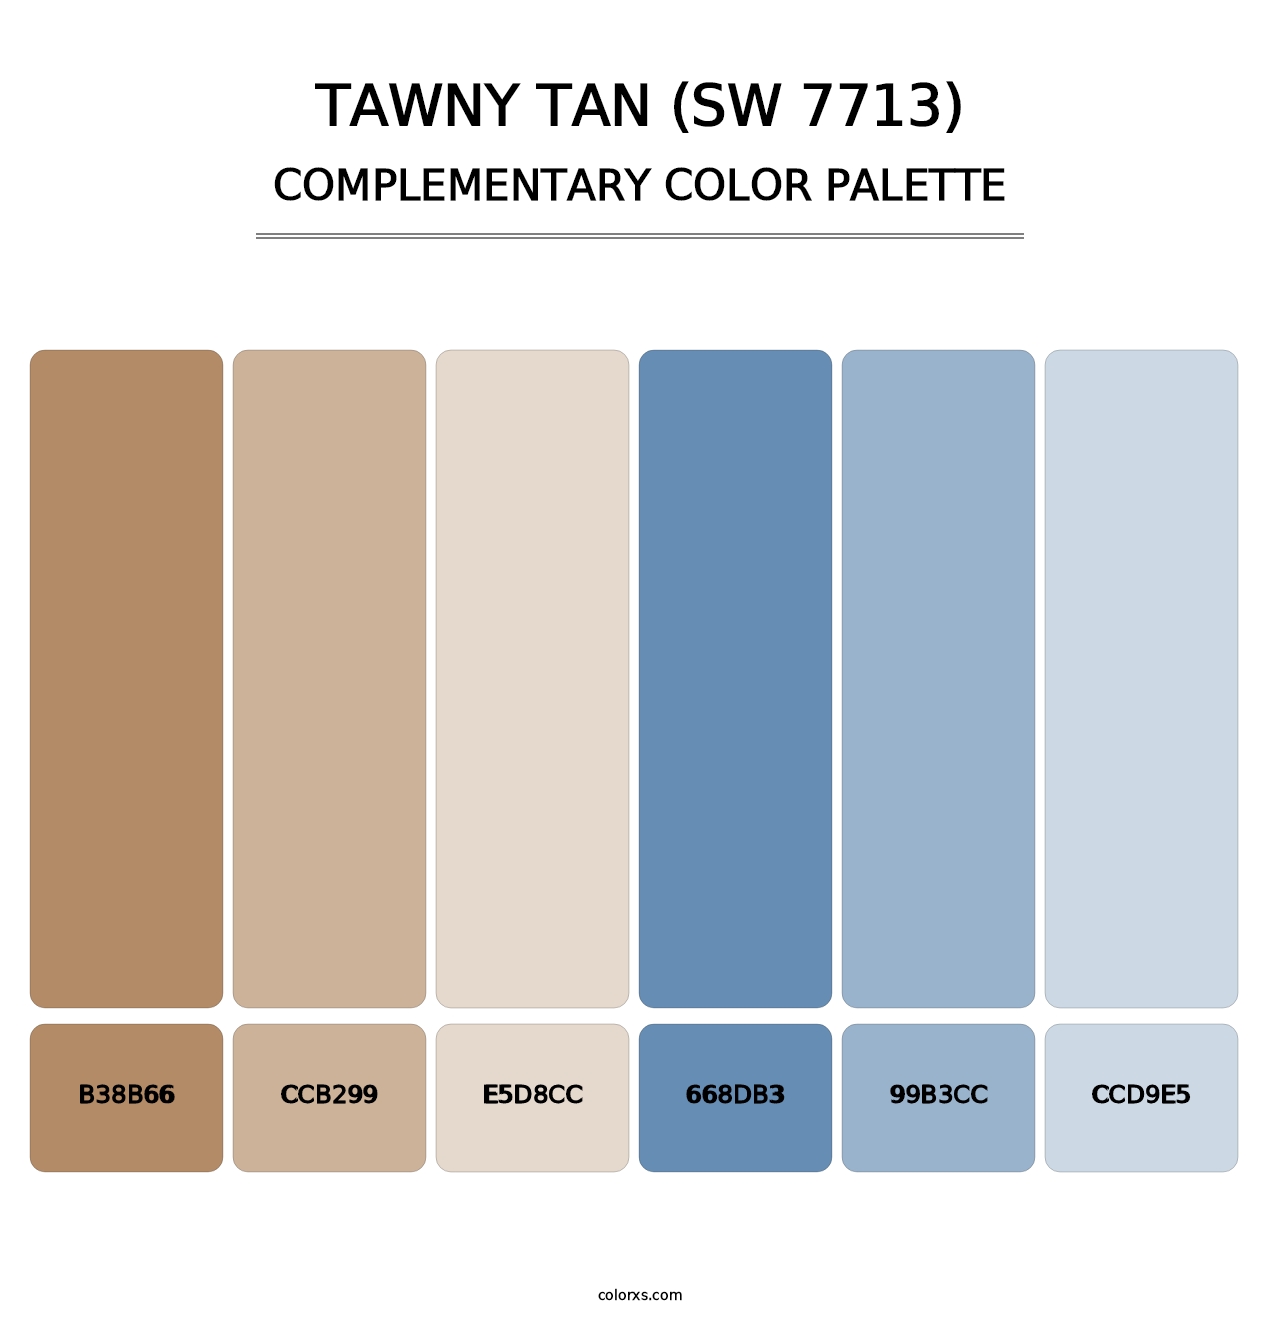 Tawny Tan (SW 7713) - Complementary Color Palette